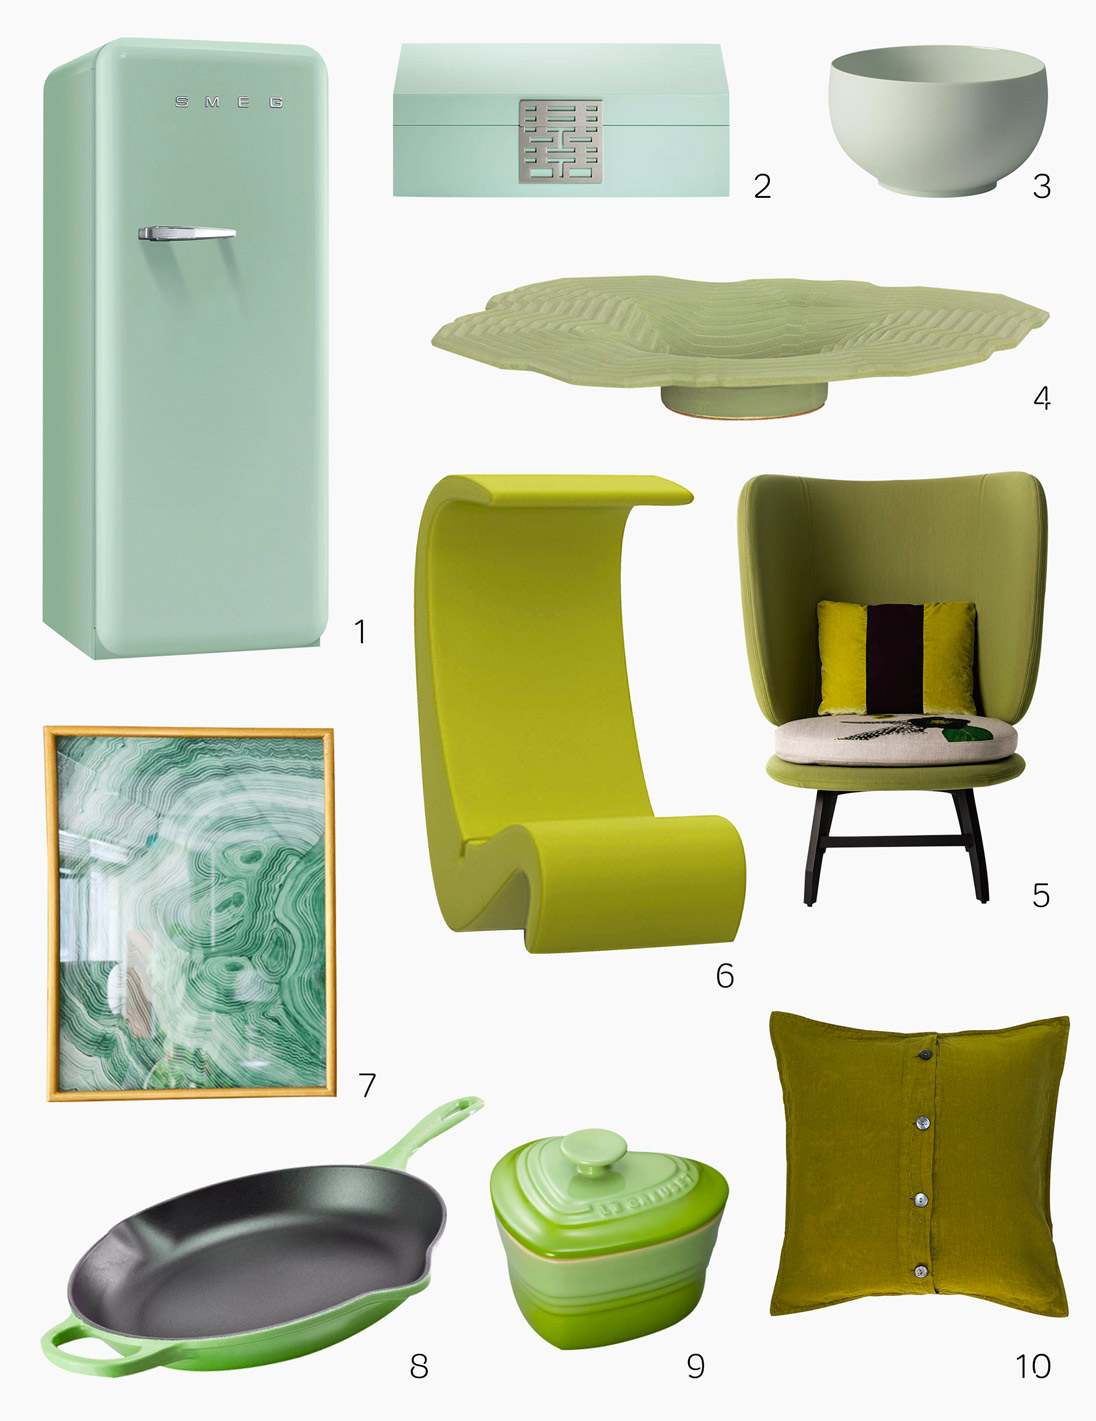 Prosducts in shades of green from Smeg, Shanghai Tang, Zi ceramics, LOCAL DESIGN, Moroso, Vitra, Lala Curio, Le Creuset and Society Limonta